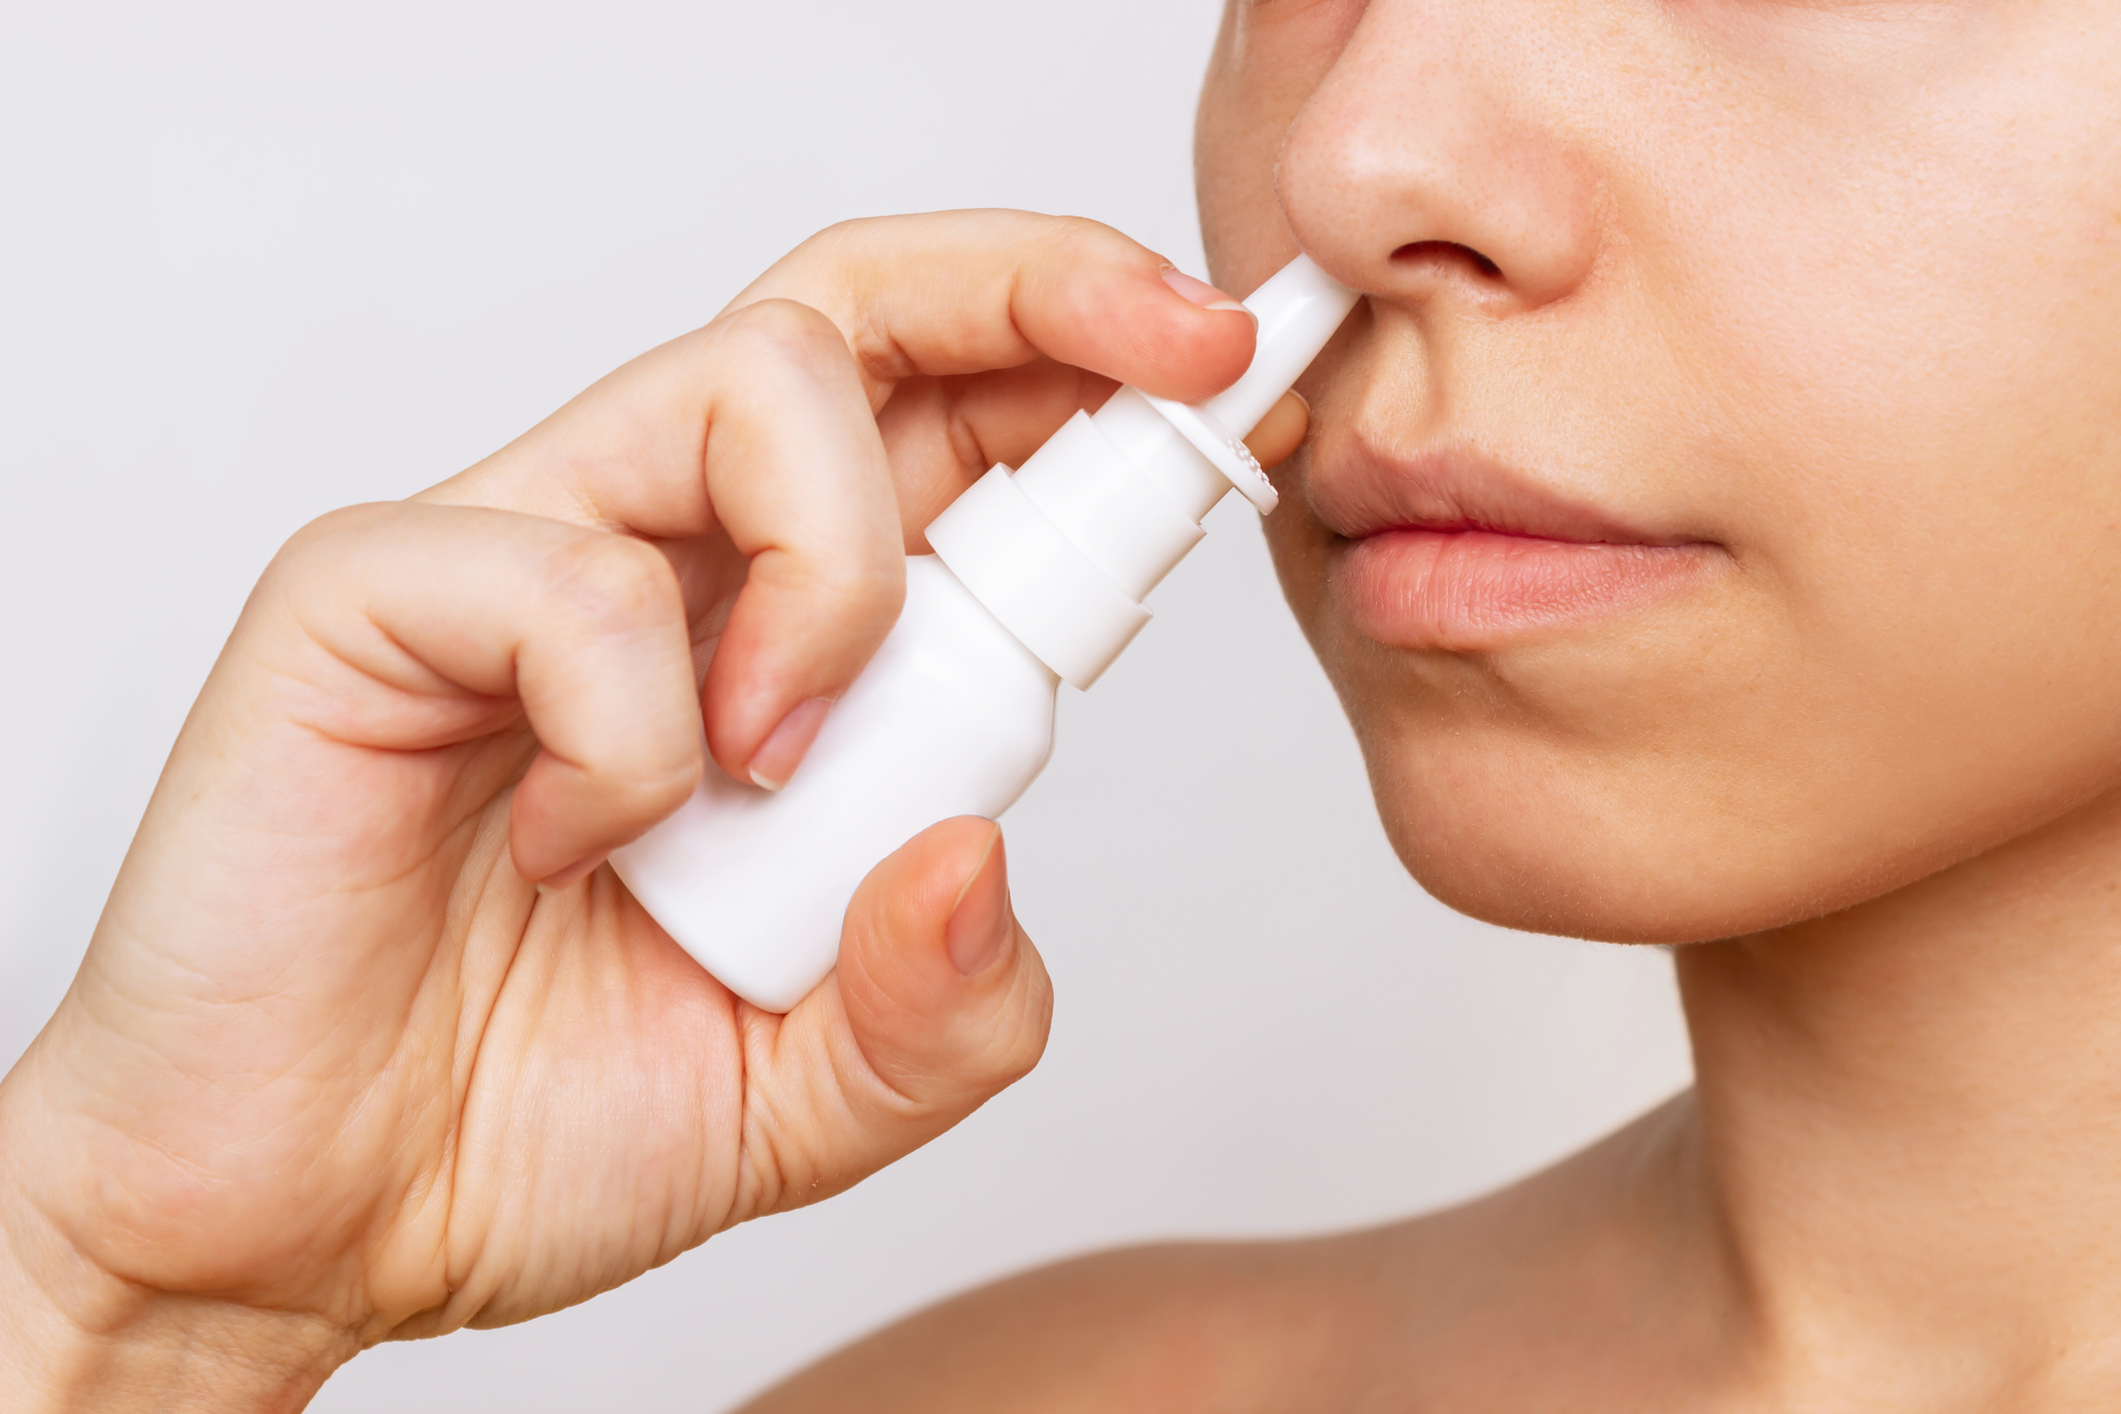 NJ Workers’ Compensation Benefits Are Extent of Recovery For Experimental Nasal Spray Tester